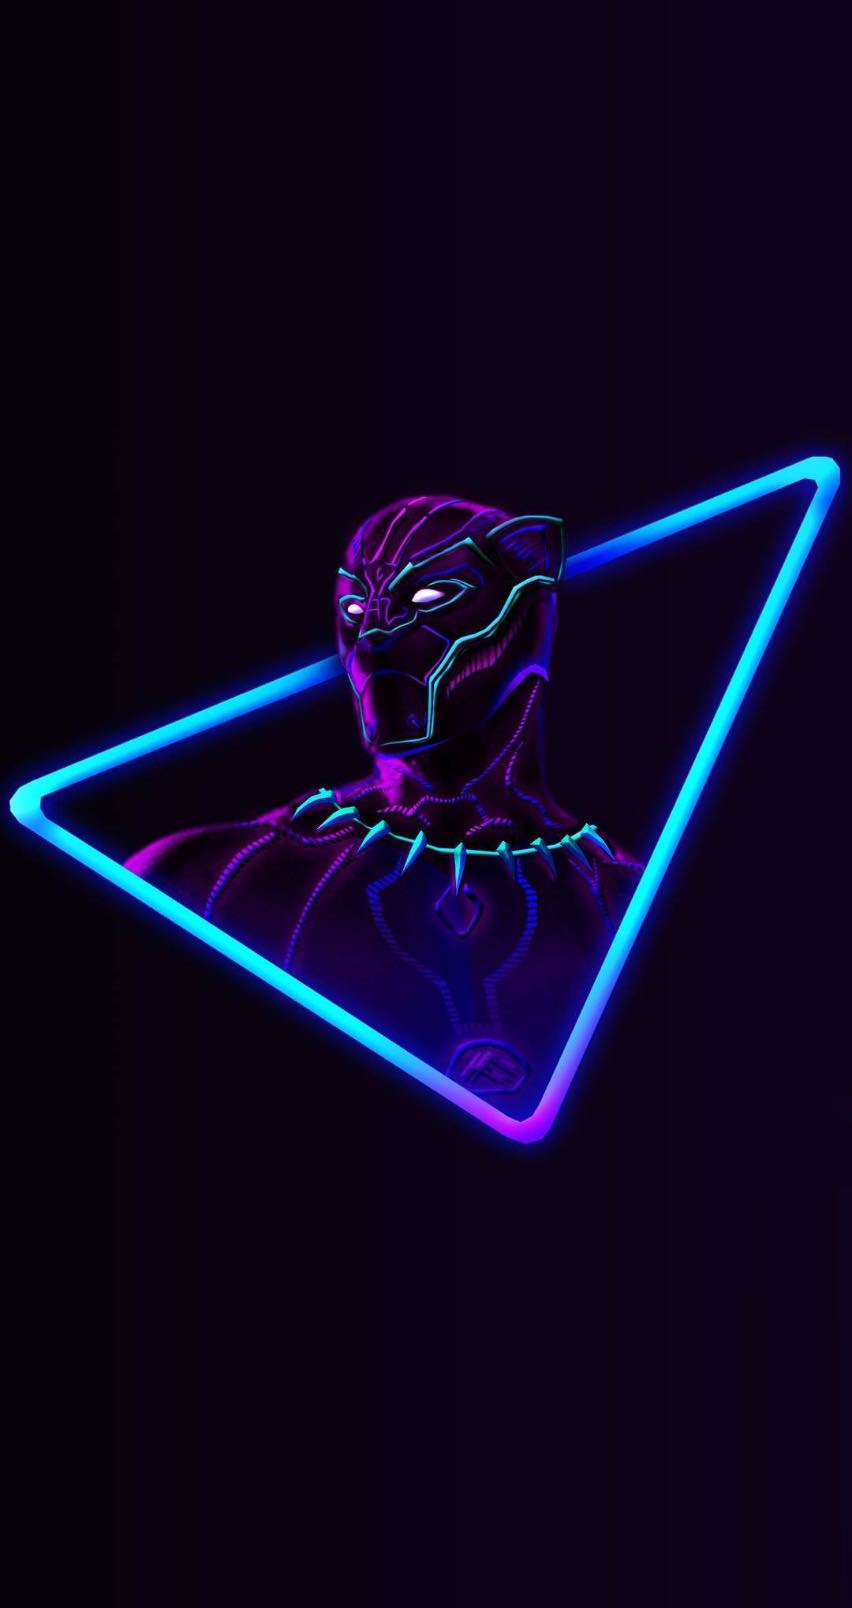 Neon Avengers Parallax Wallpapers for iPhone 8 based on artwork